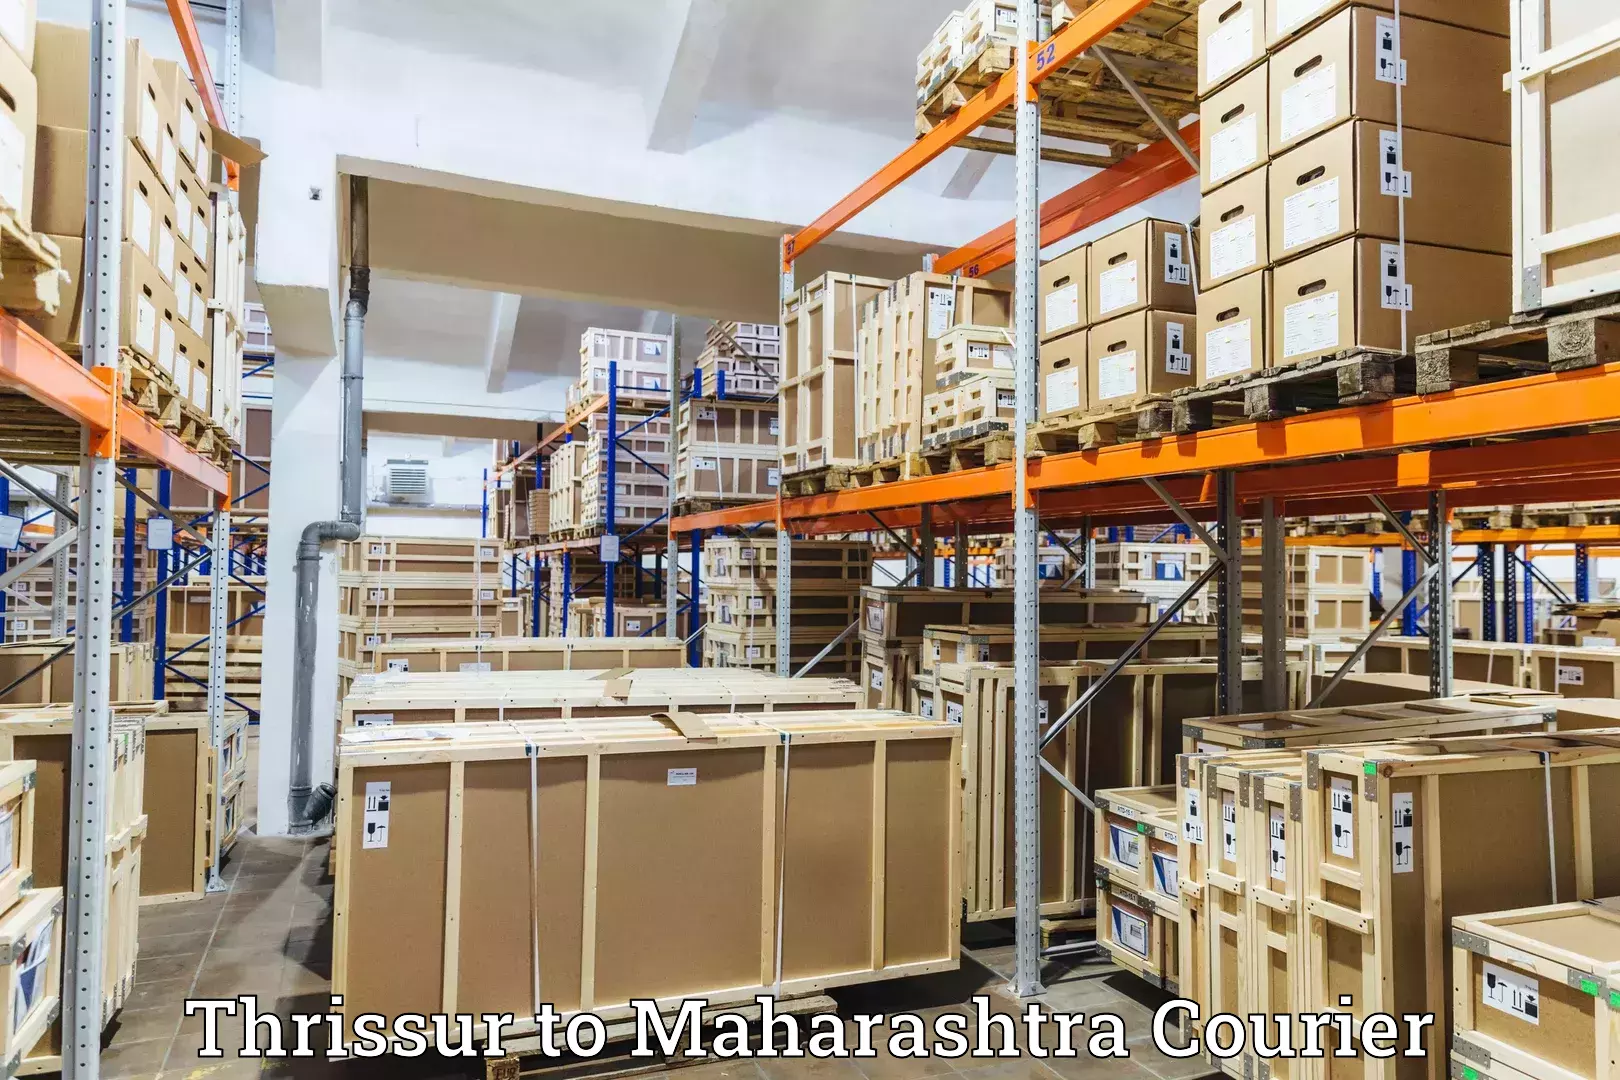 Courier service innovation Thrissur to DY Patil Vidyapeeth Pune